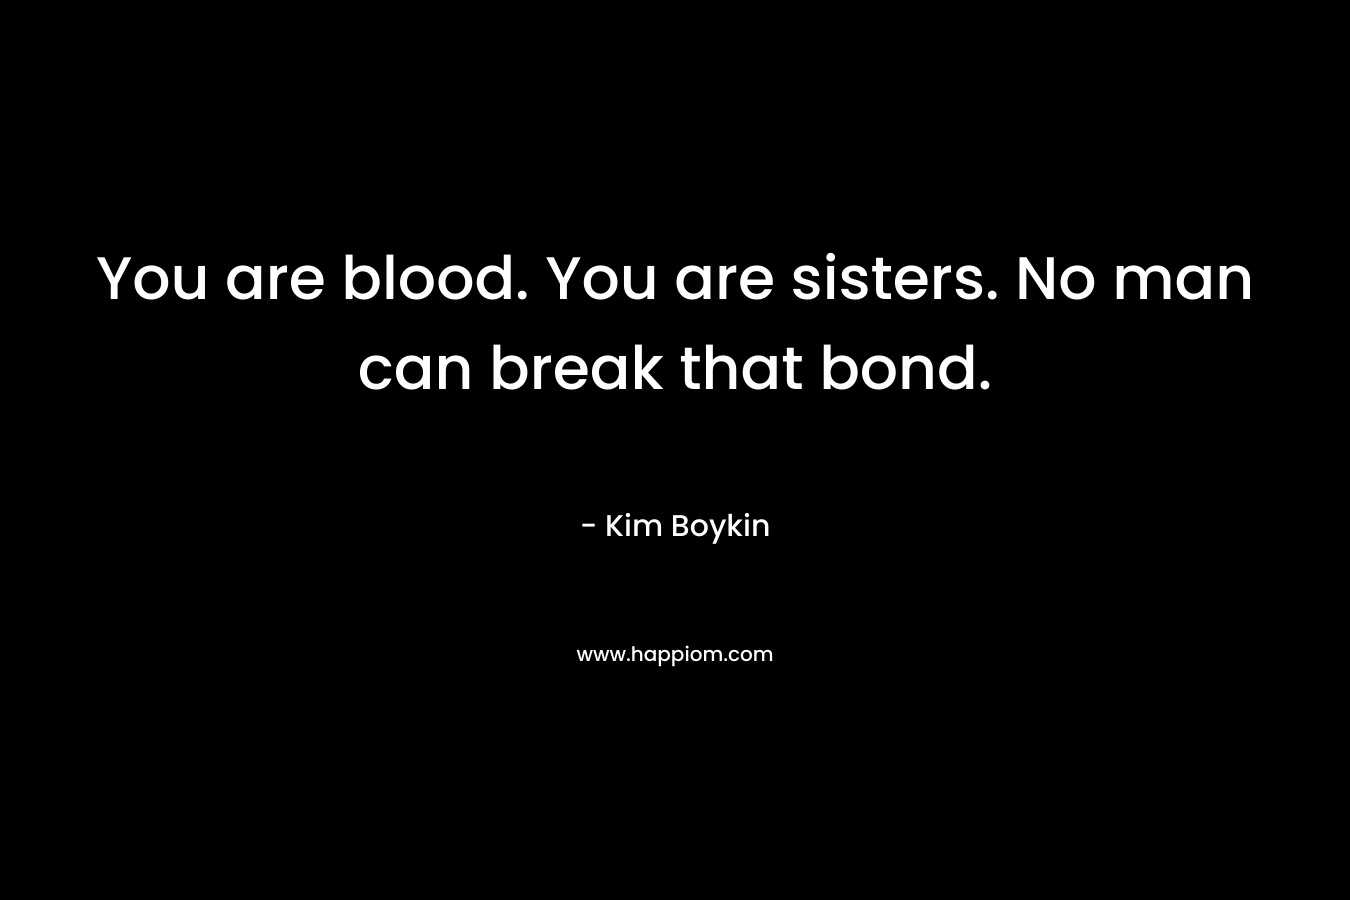 You are blood. You are sisters. No man can break that bond.